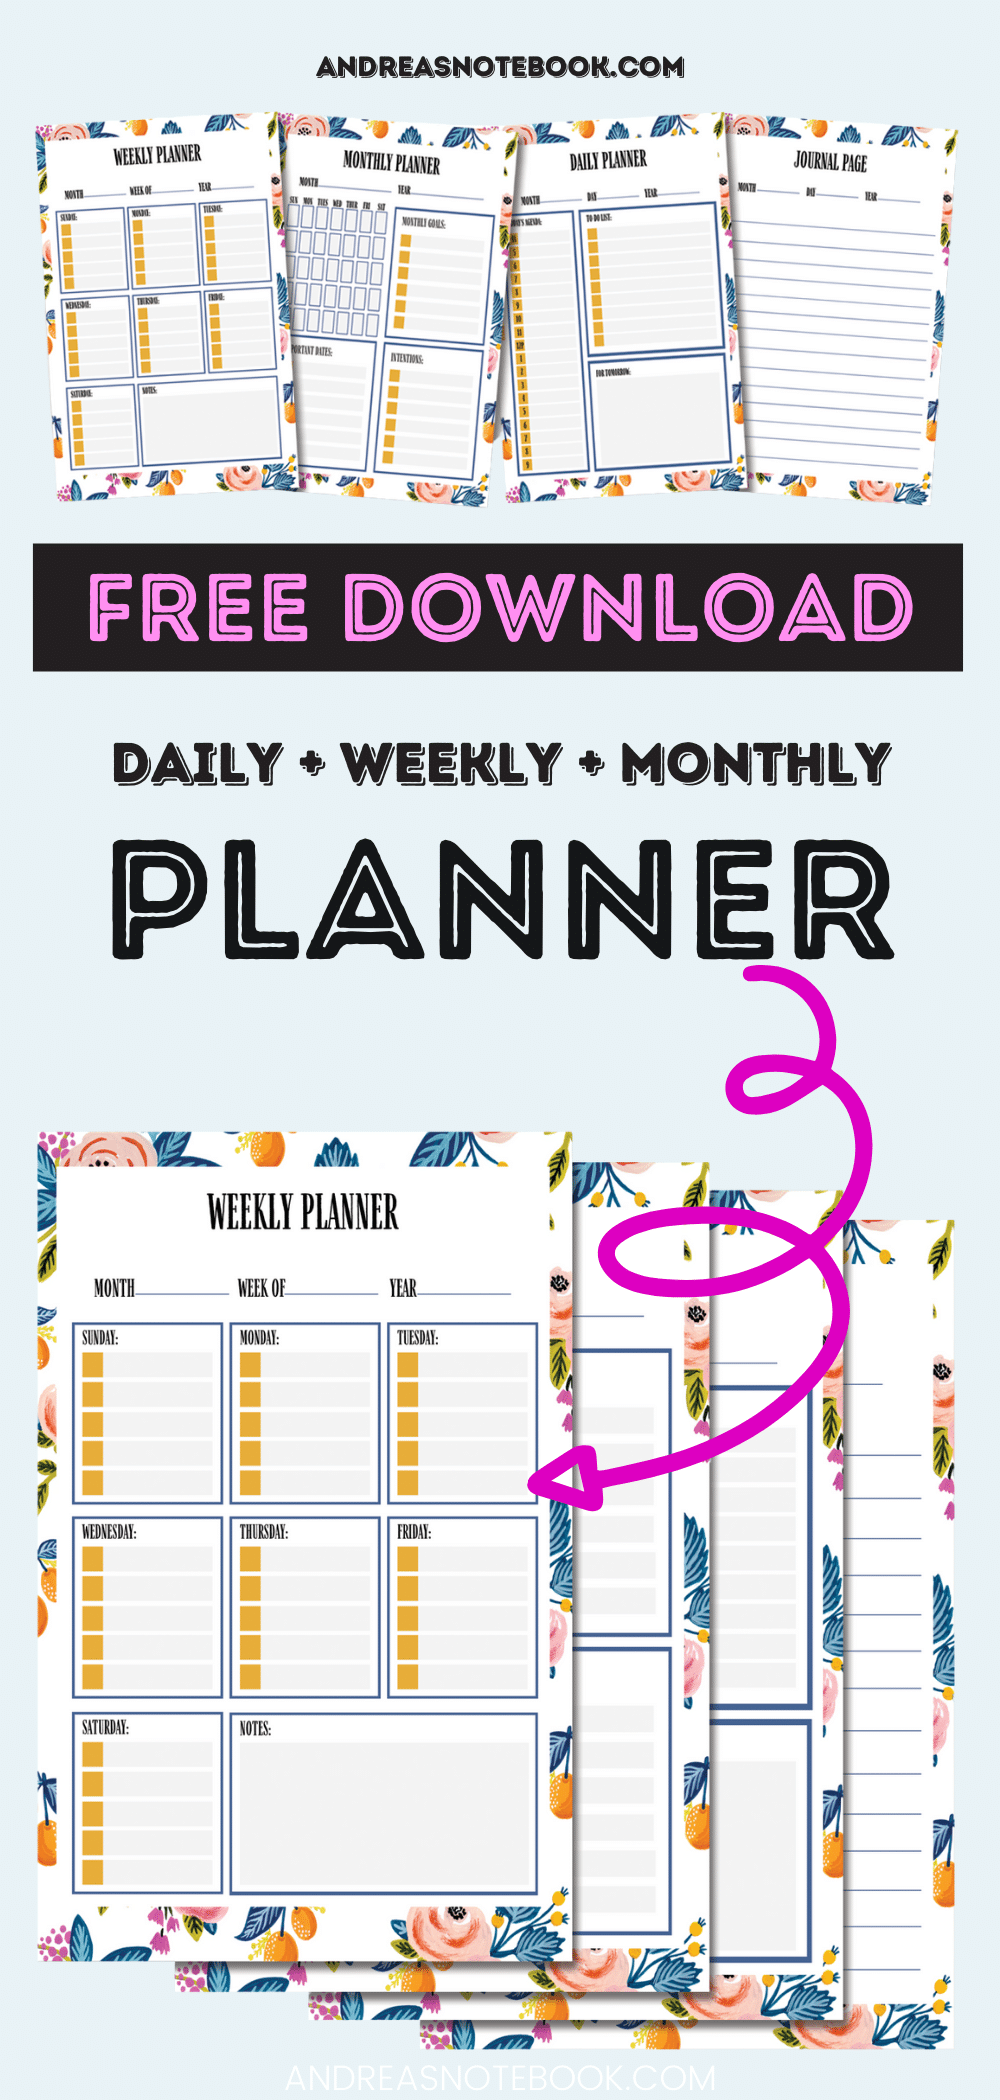 Cute Free Printable Planner Daily, Weekly, Monthly Andrea's Notebook